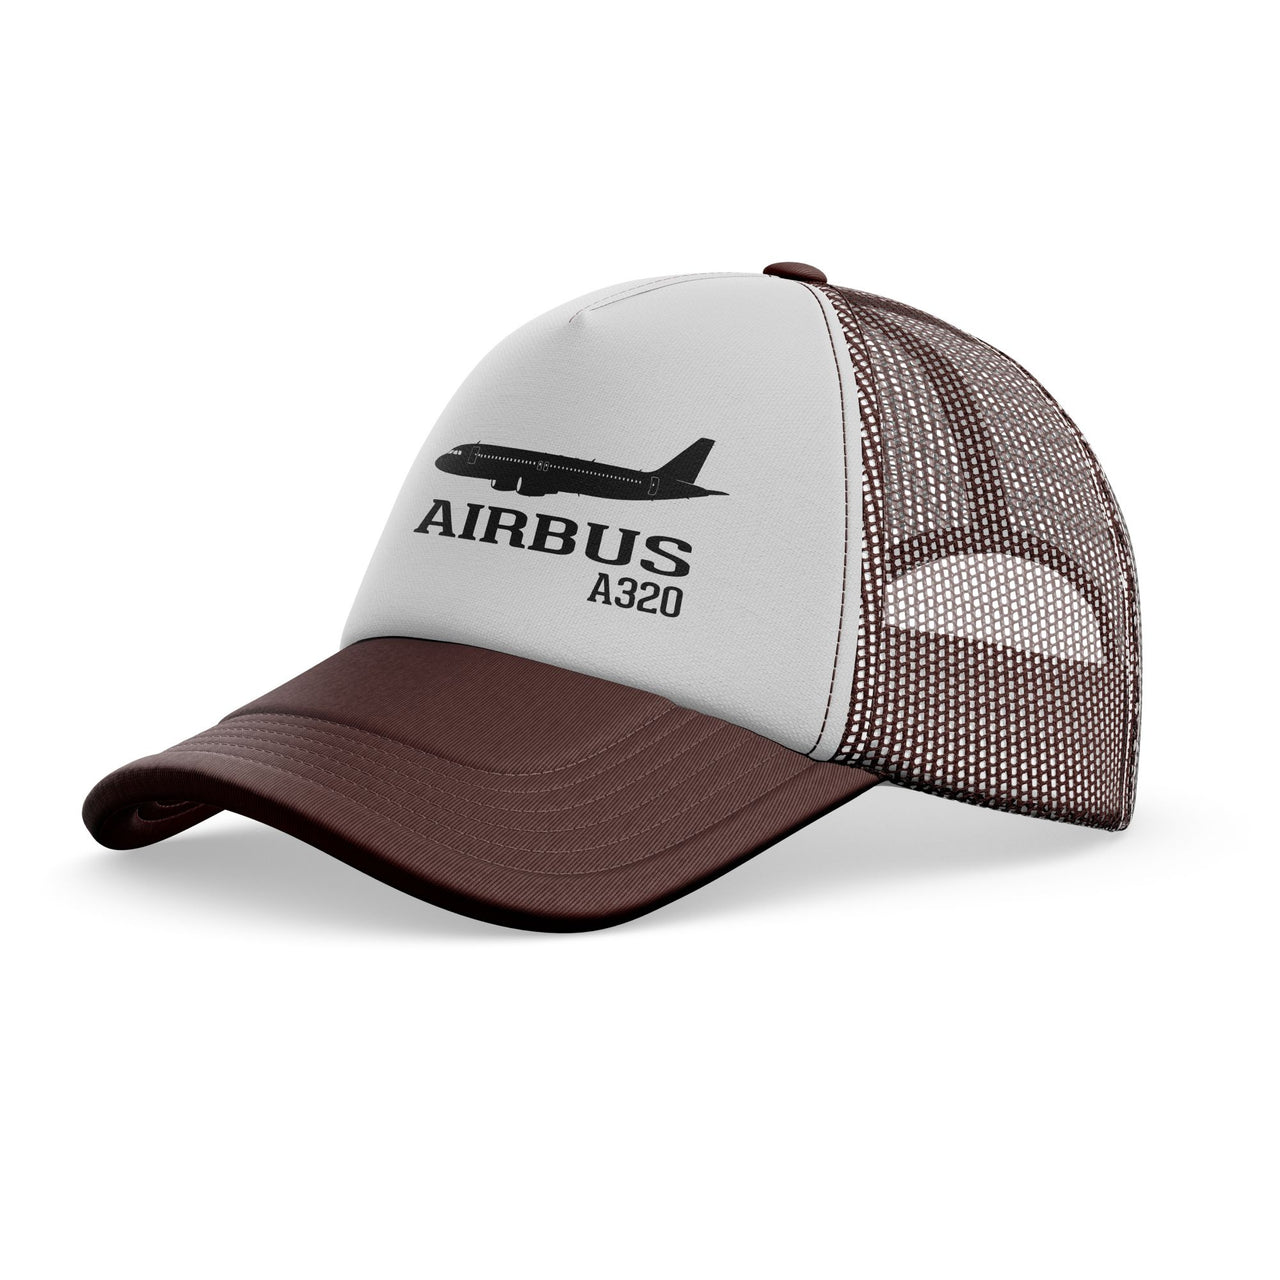 Airbus A320 Printed Designed Trucker Caps & Hats